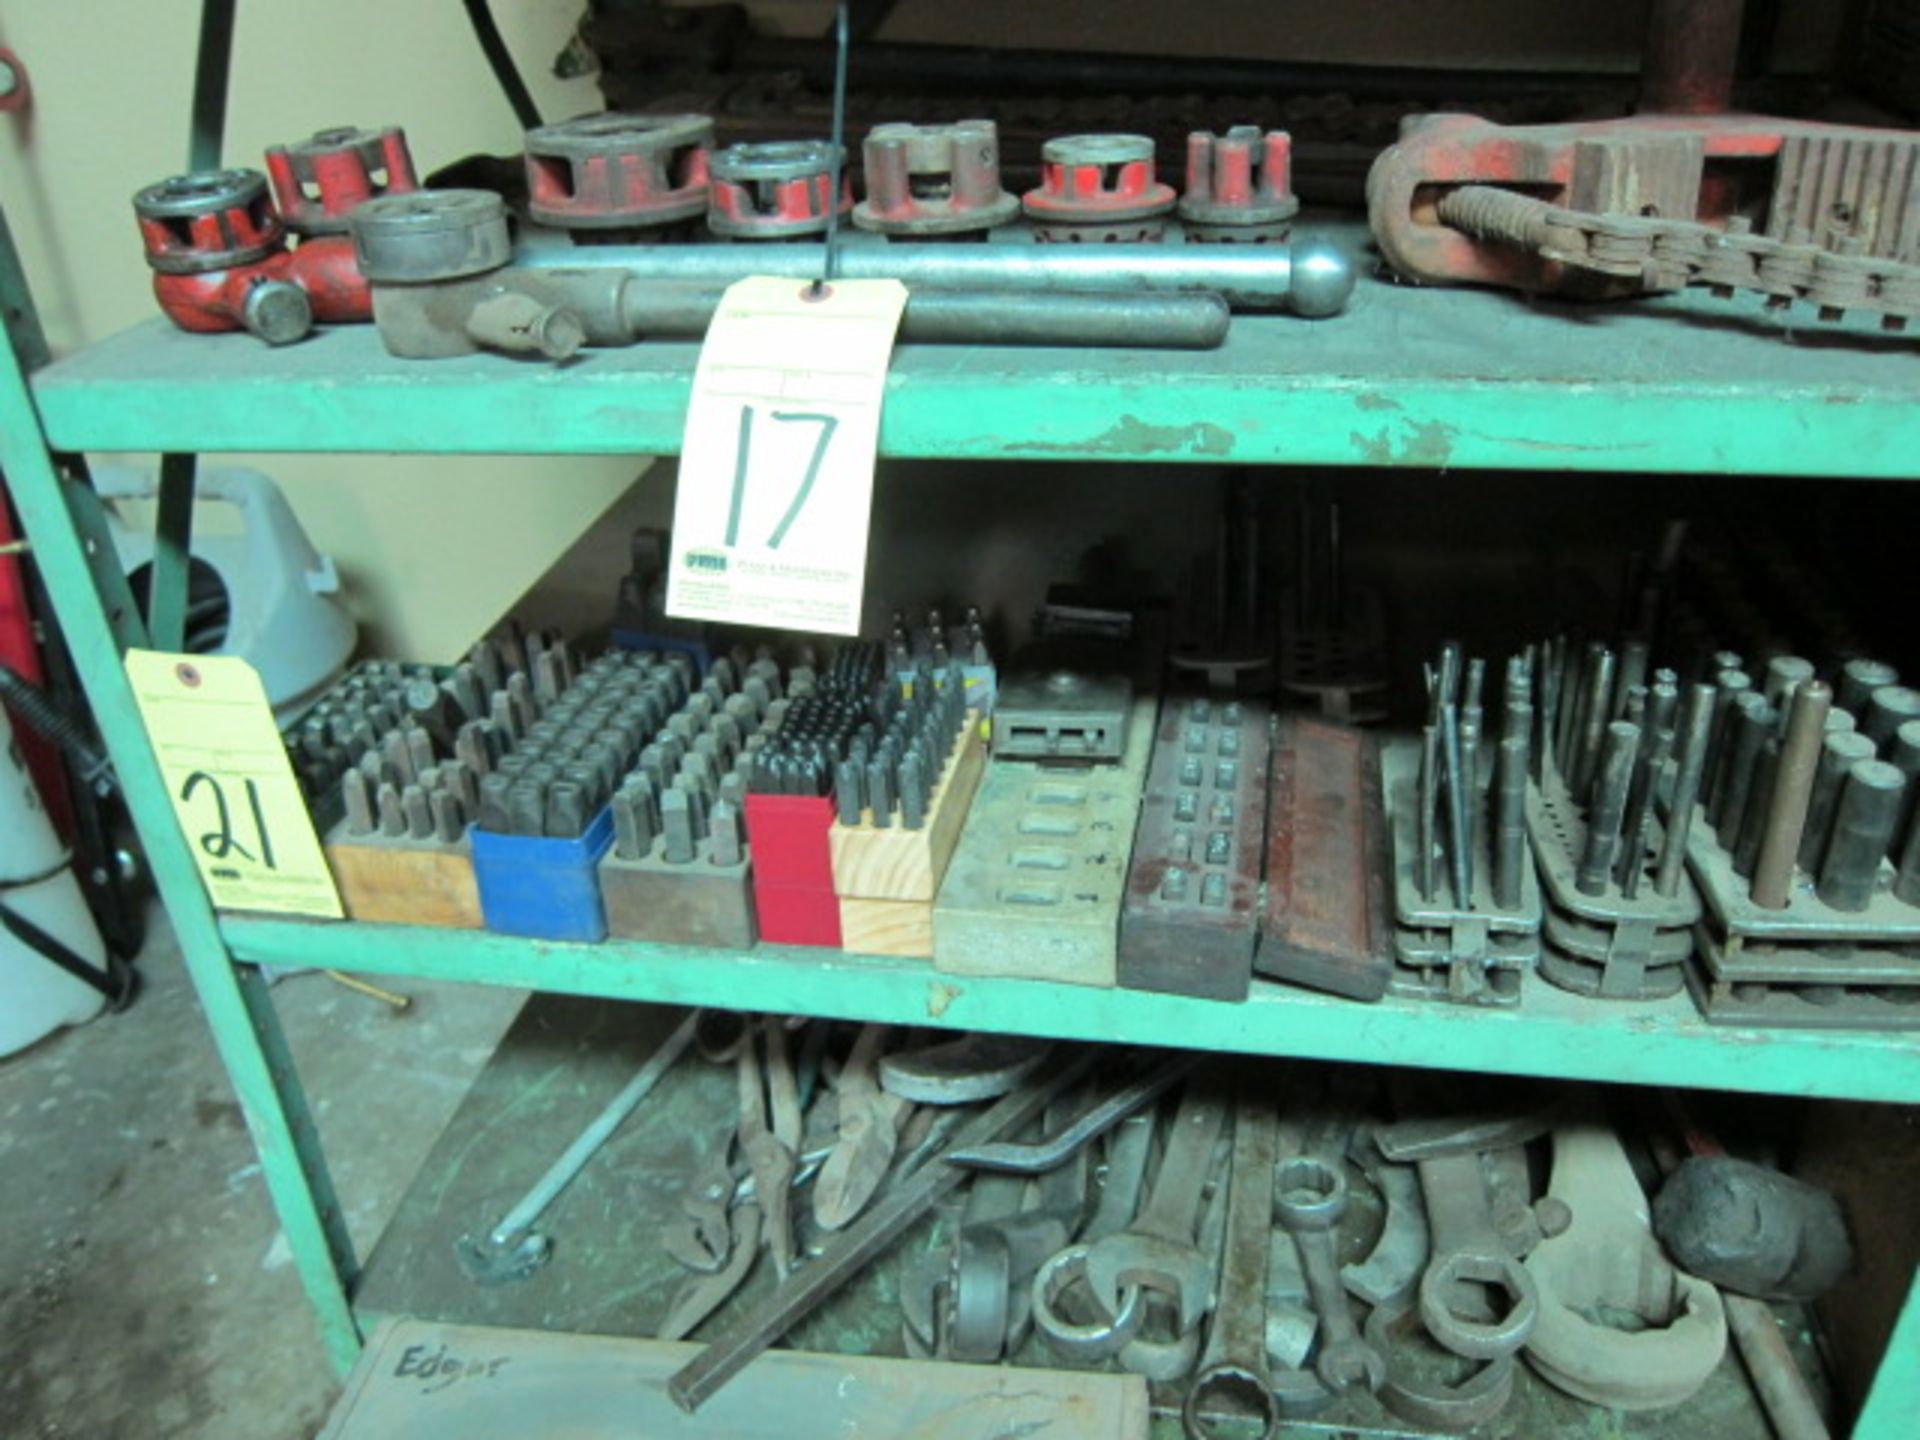 LOT CONSISTING OF: hand stamps & transfer punches